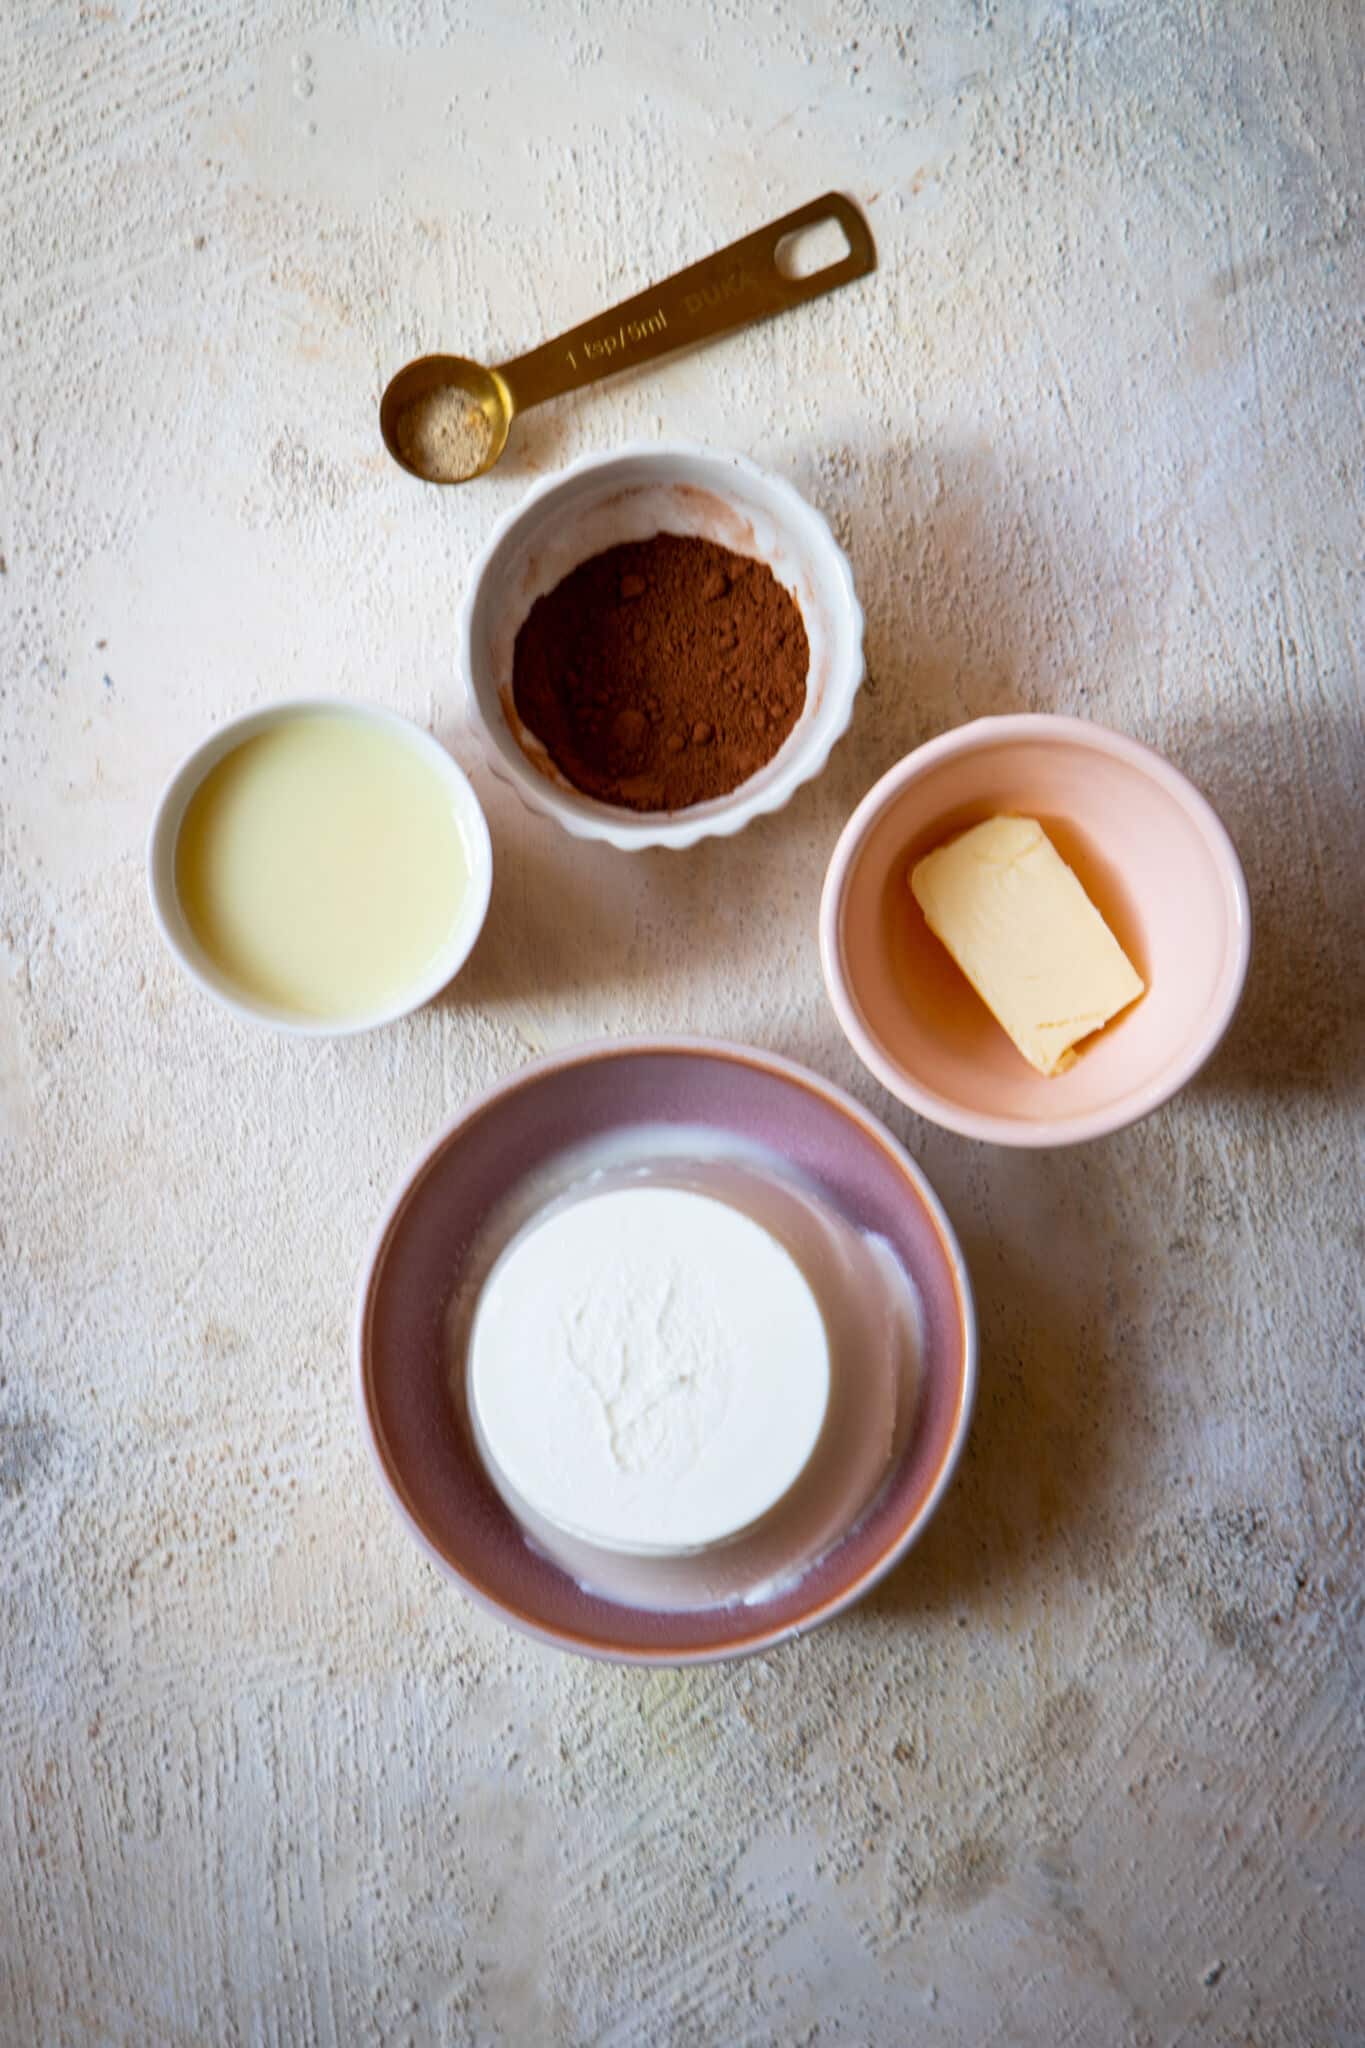 A display of the ingredients: cocoa powder, ricotta cheese, butter, and sweetened condensed milk in individual bowls with a gold teaspoon of cardamom on a table.